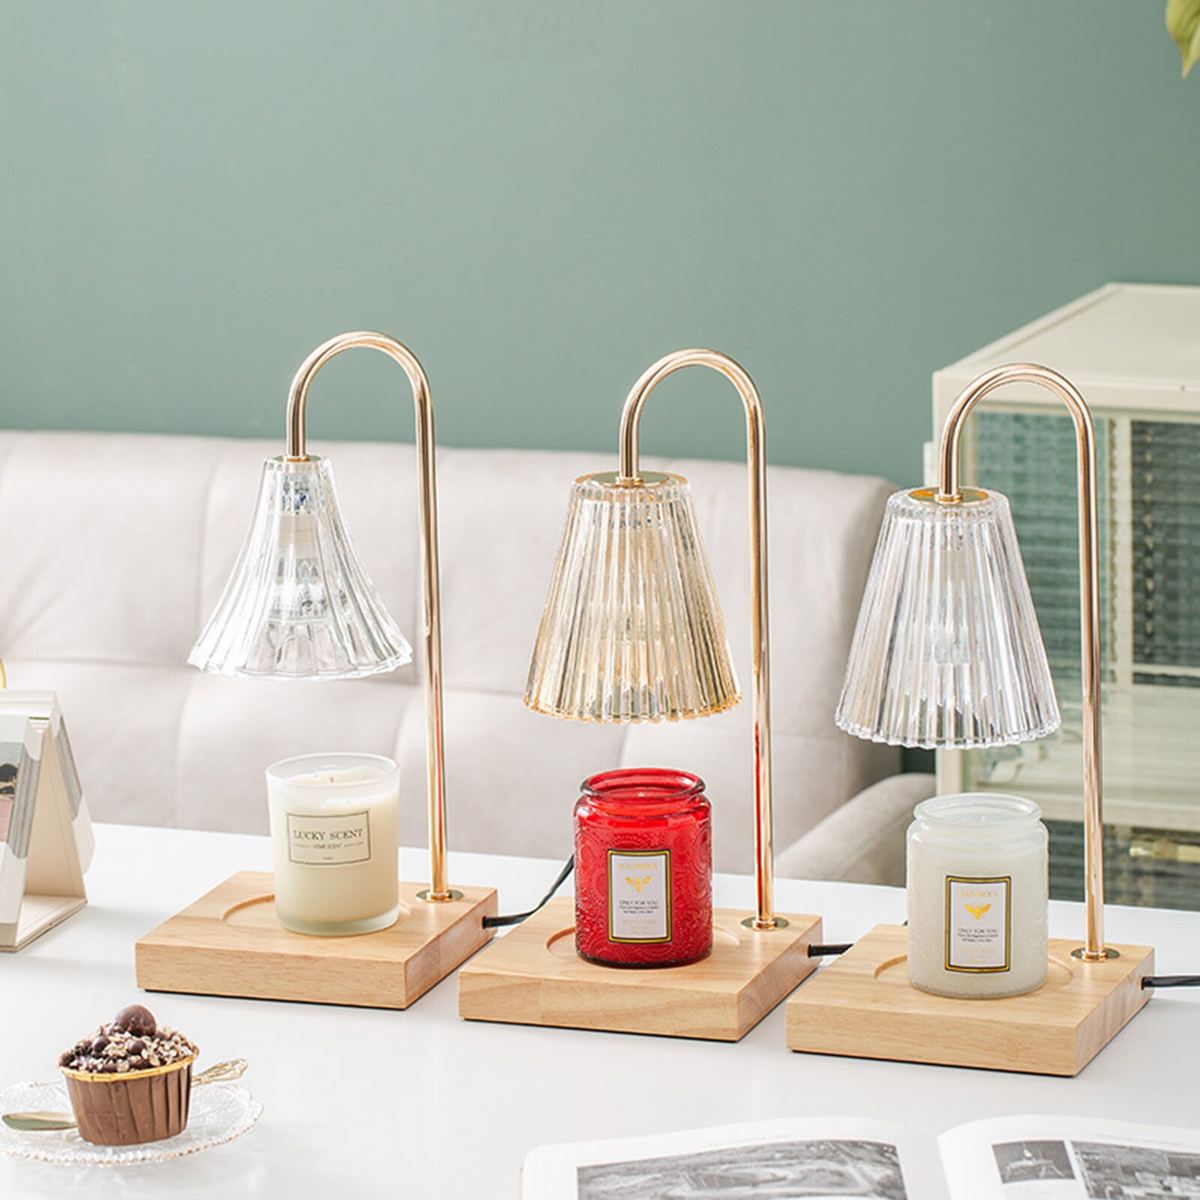 Lampe chauffe-bougie – AMBIENT HOME